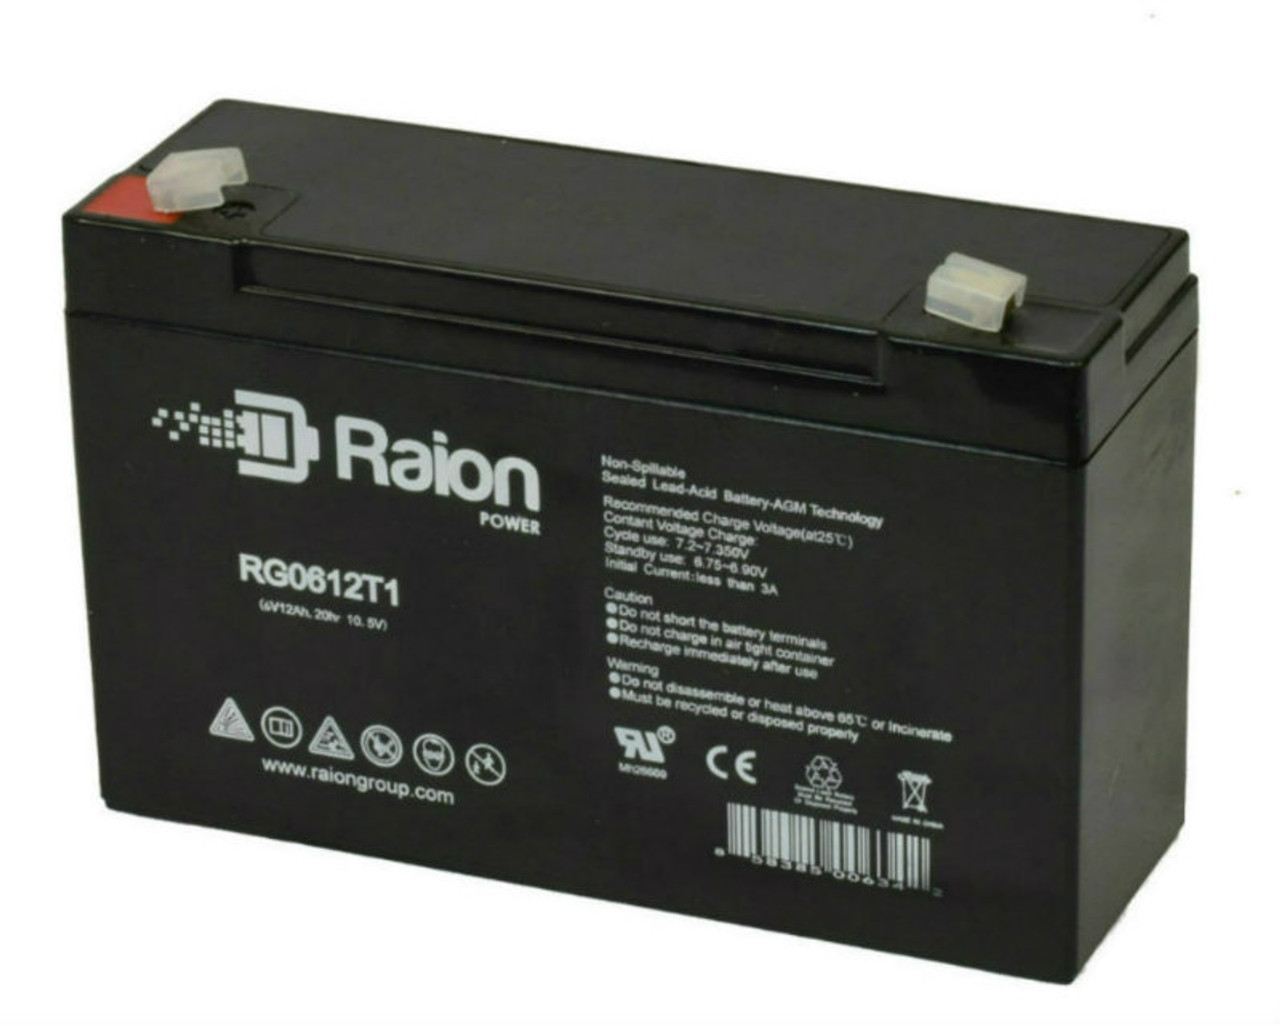 Raion Power RG06120T1 Replacement Battery for Upsonic Station 140A